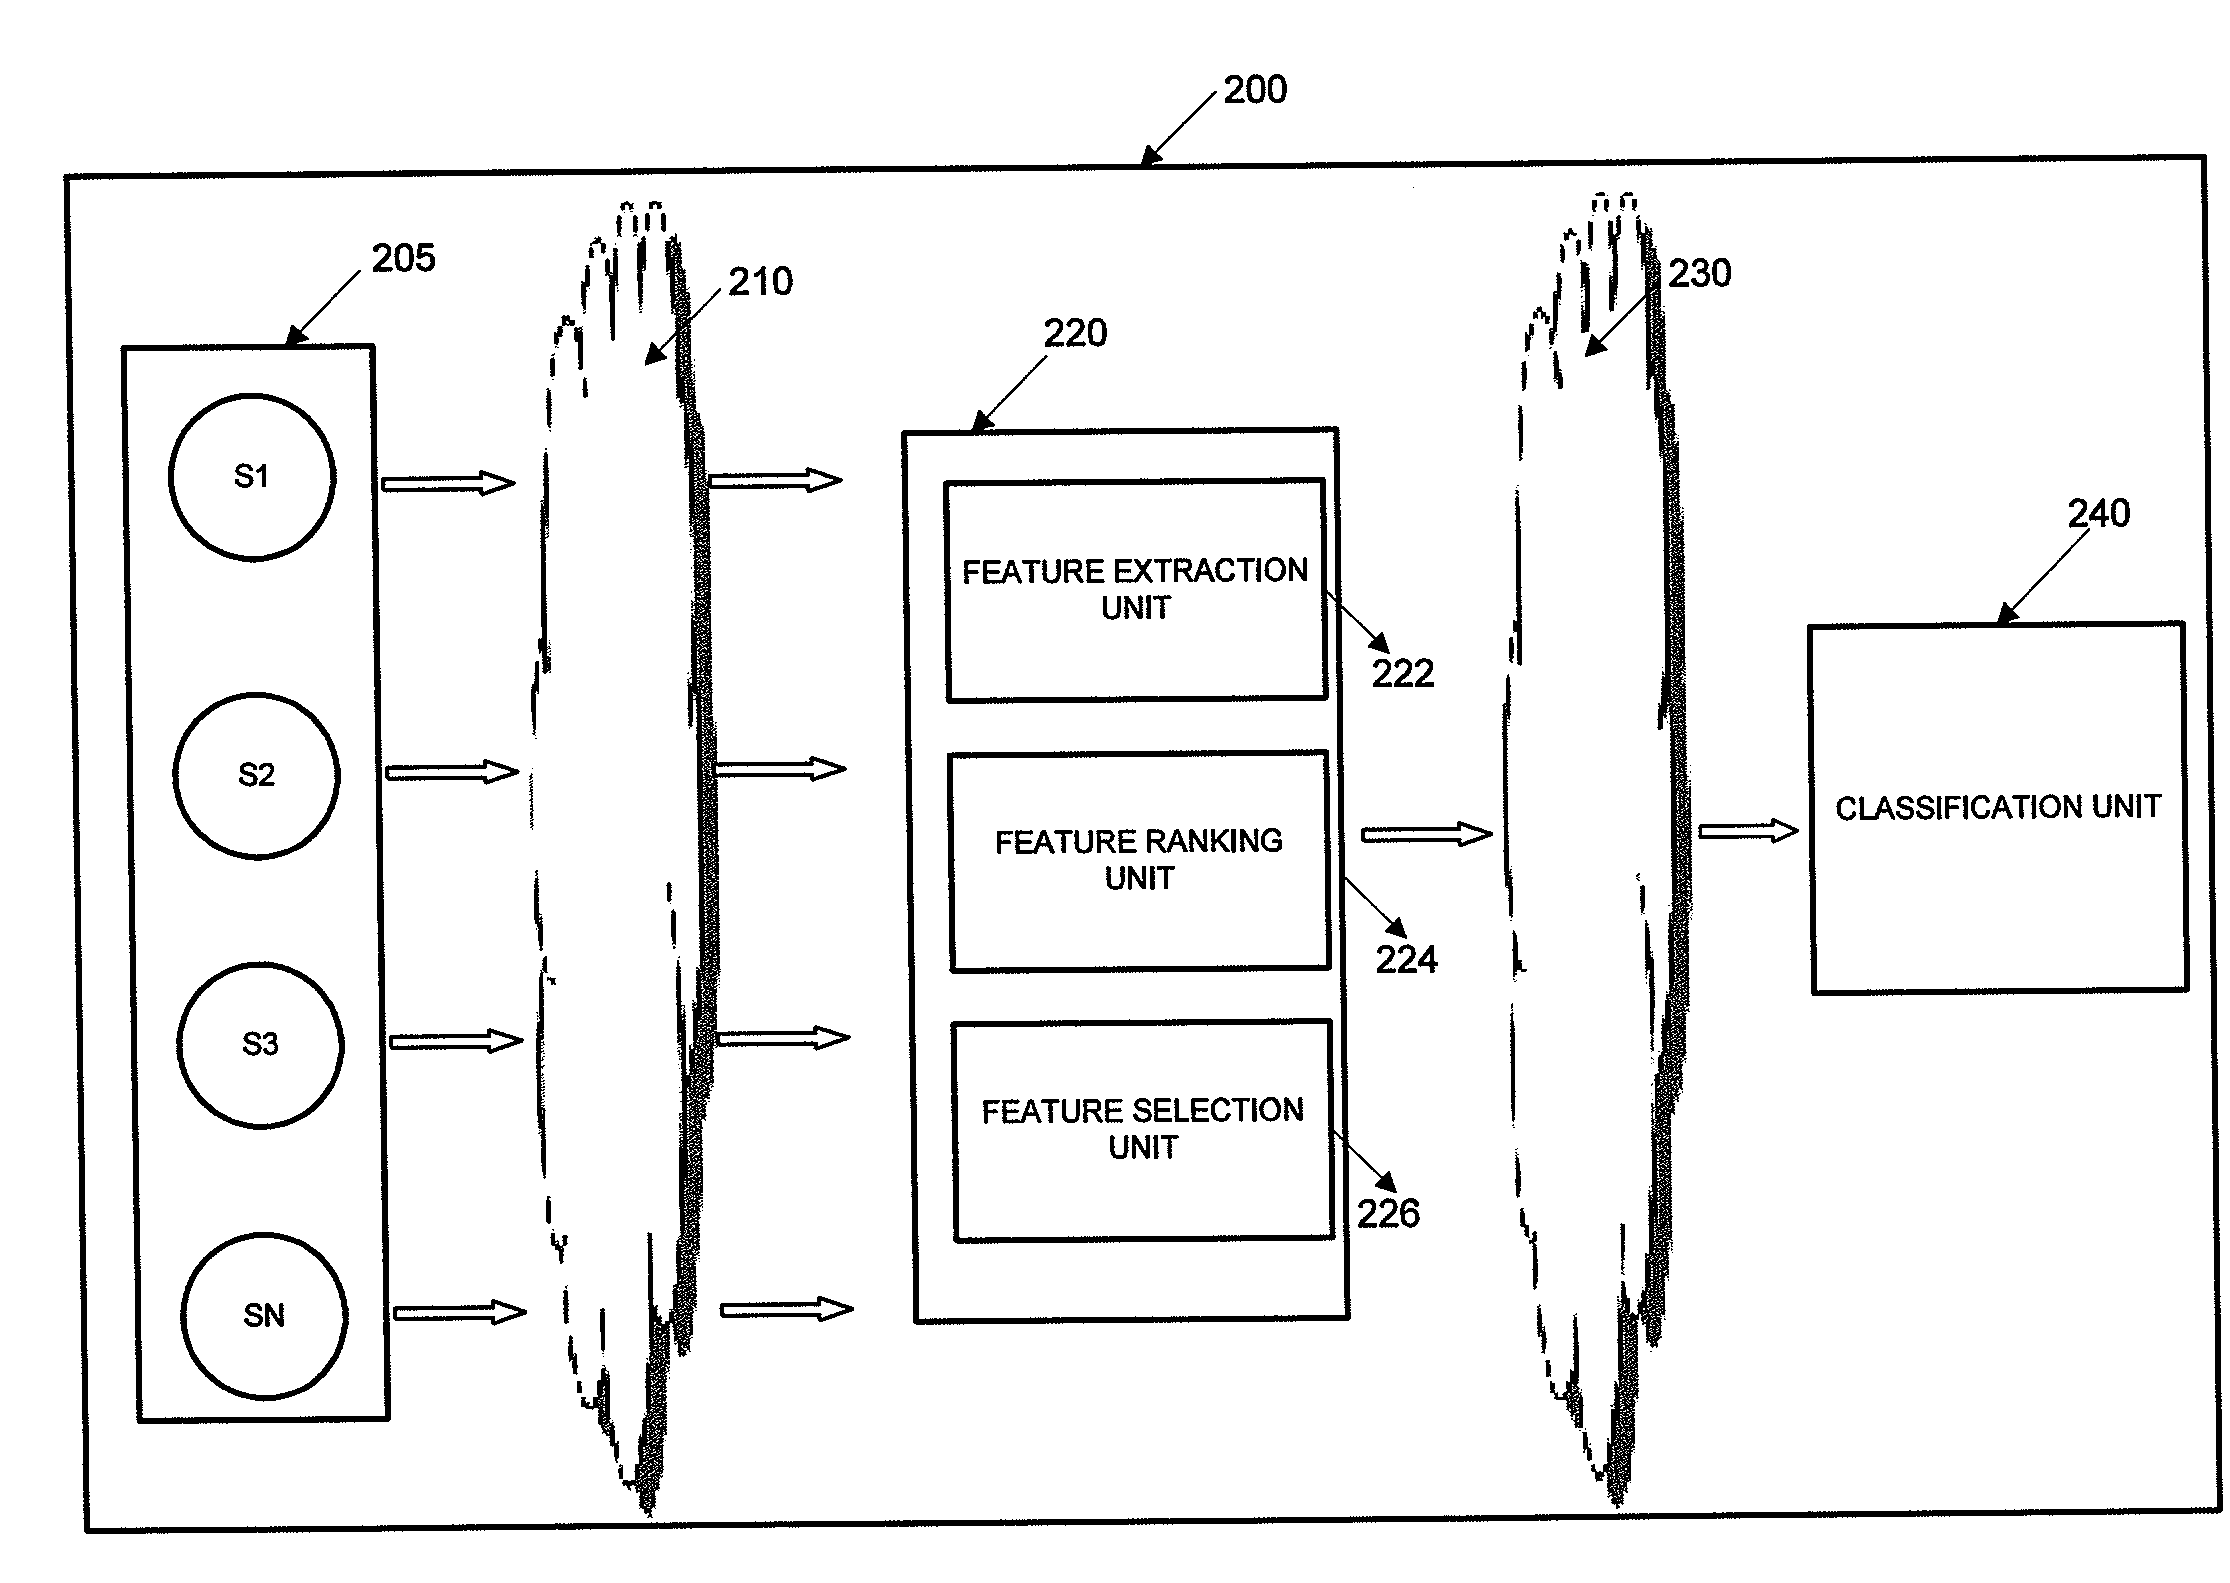 Data reduction method to adaptively scale down bandwidth and computation for classification problems